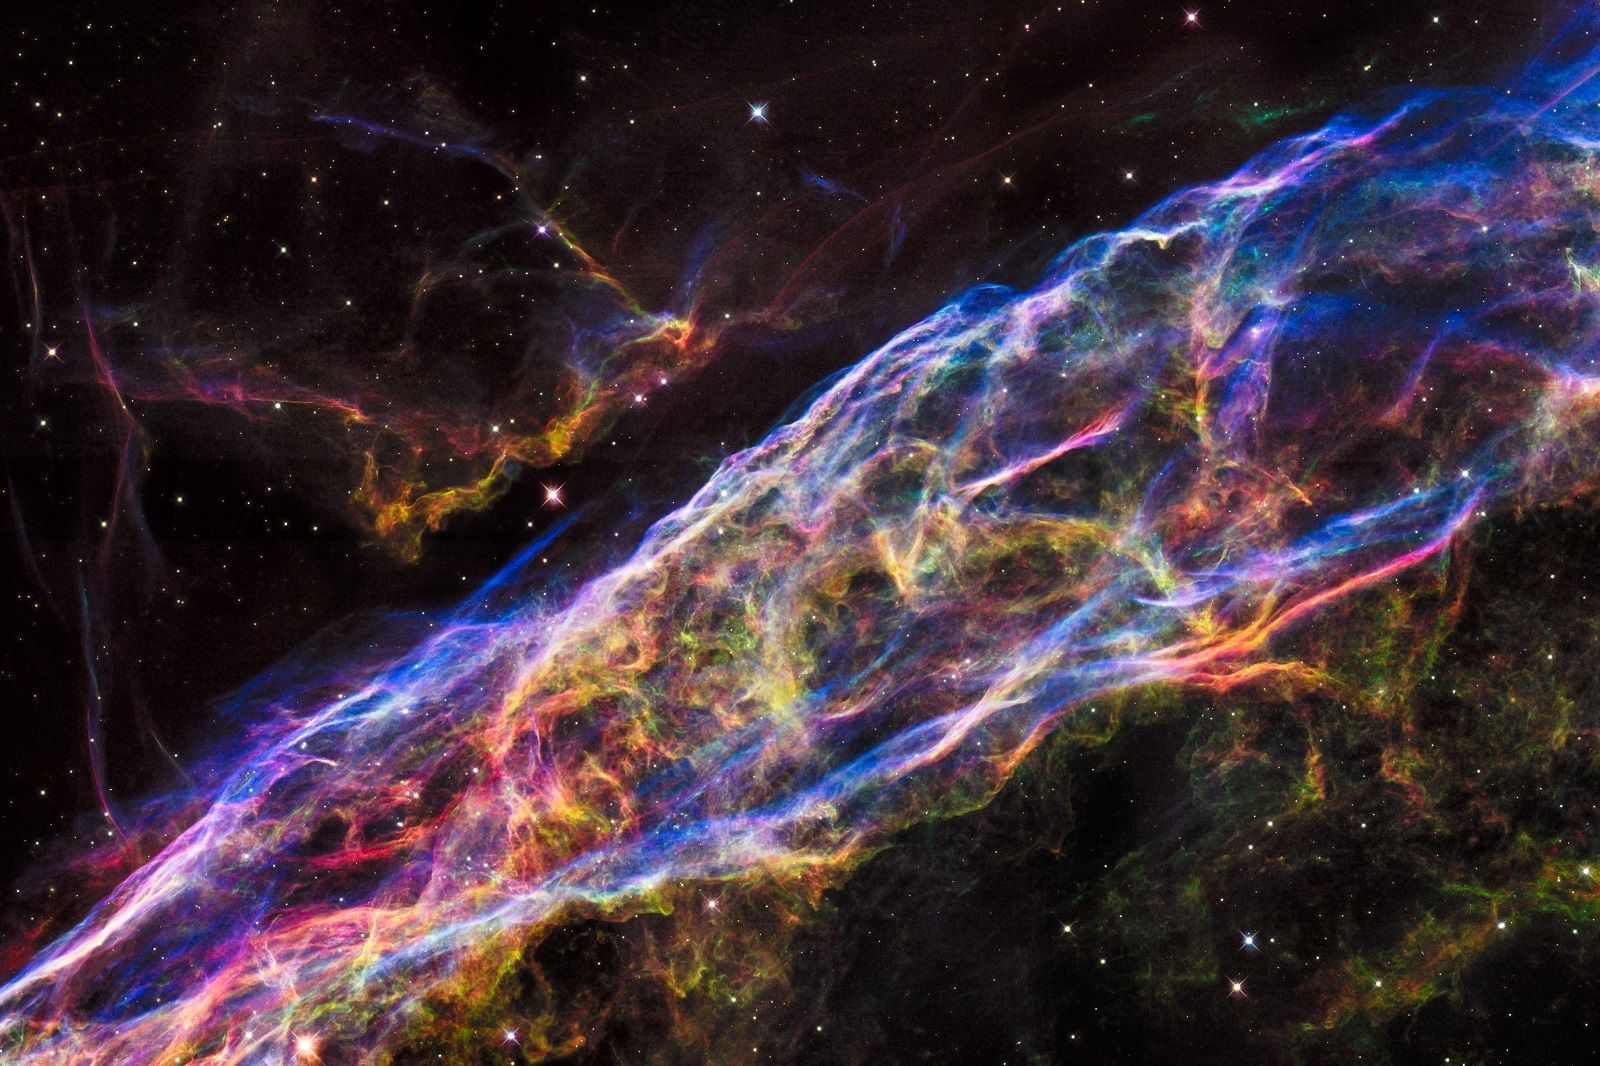 Astounding images from the depths of the Universe courtesy of the Hubble Space Telescope image 18